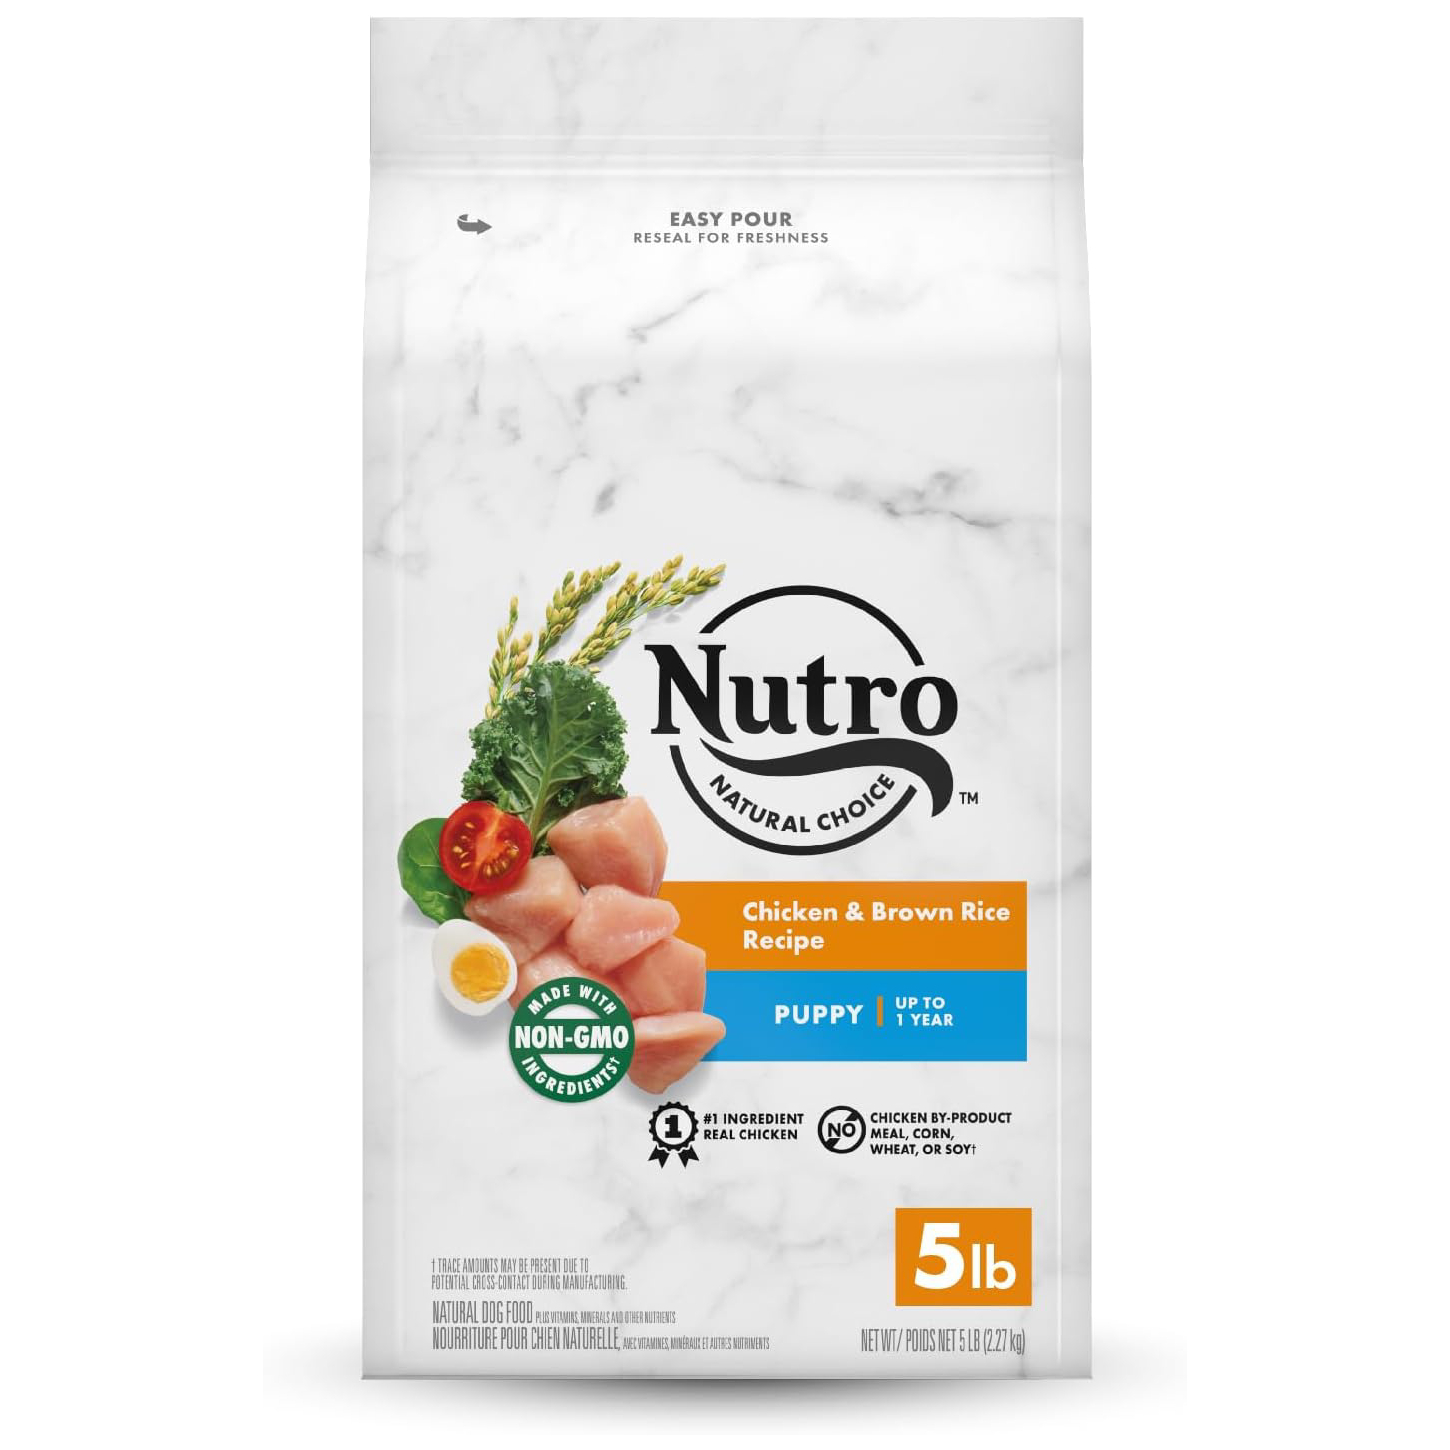 New Project NUTRO NATURAL CHOICE Puppy Dry Dog Food